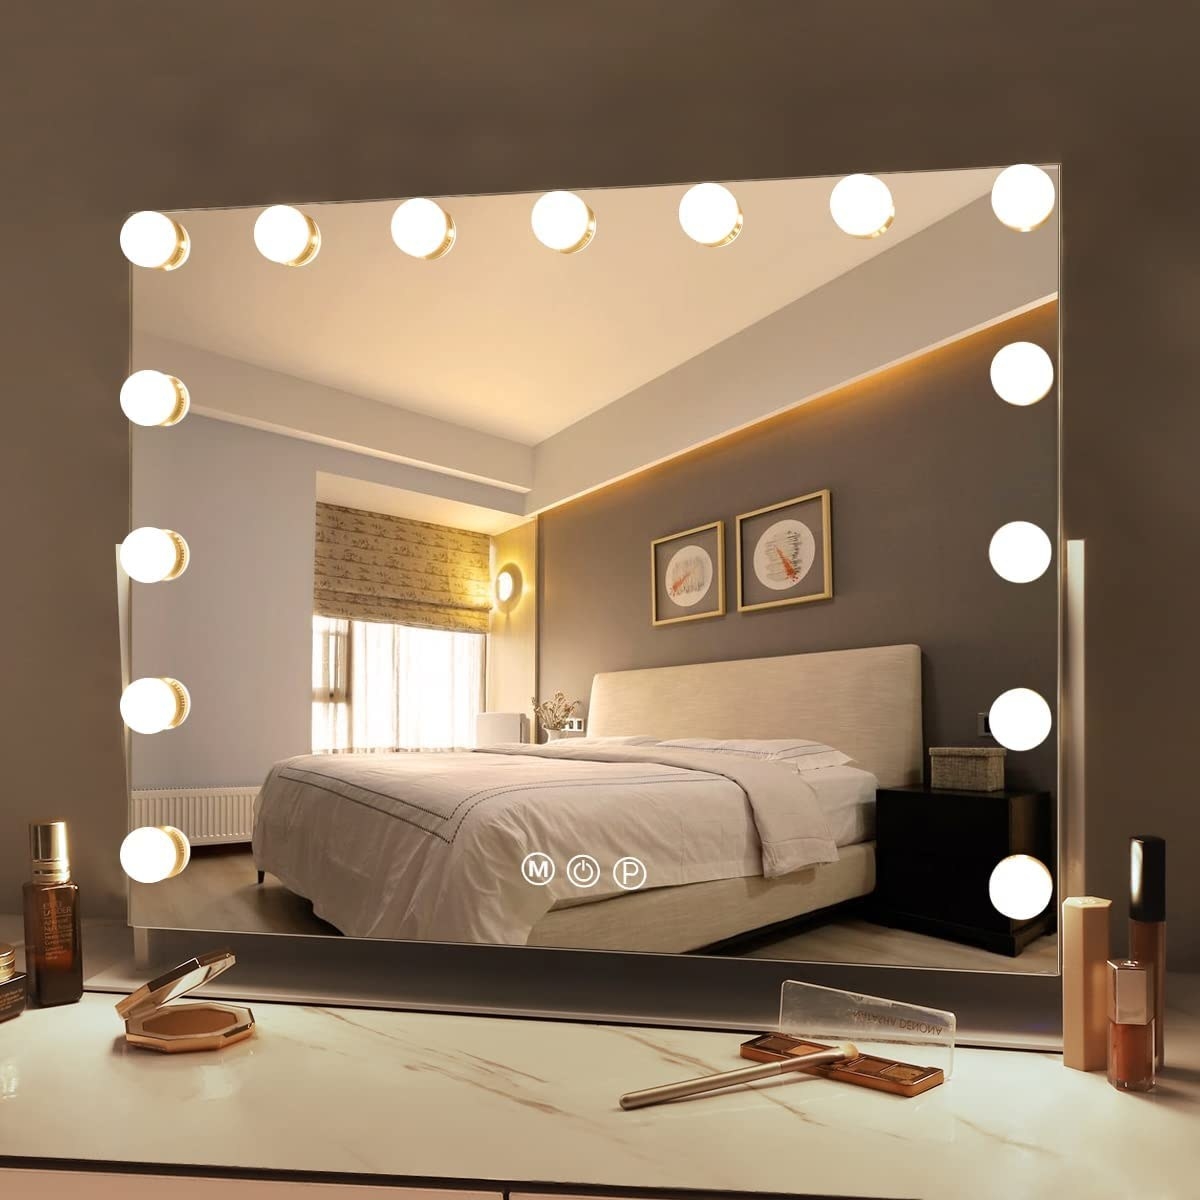 the mirror on top of a vanity in a bedroom